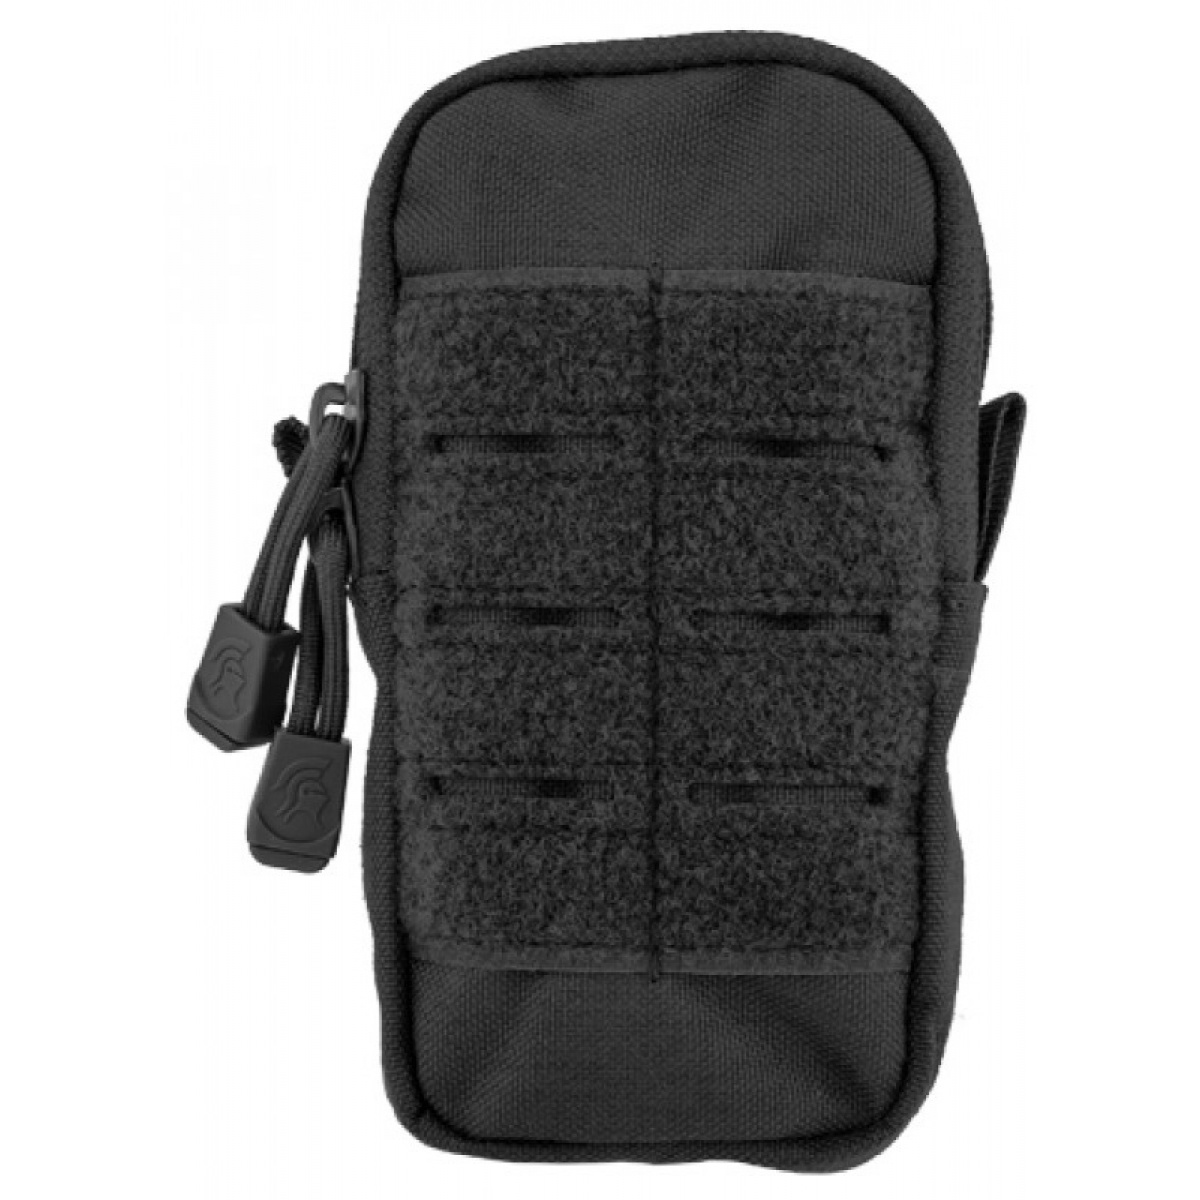 Lancer Tactical Small Enclosed M4 EMT Utility Pouch - BLACK | Airsoft ...